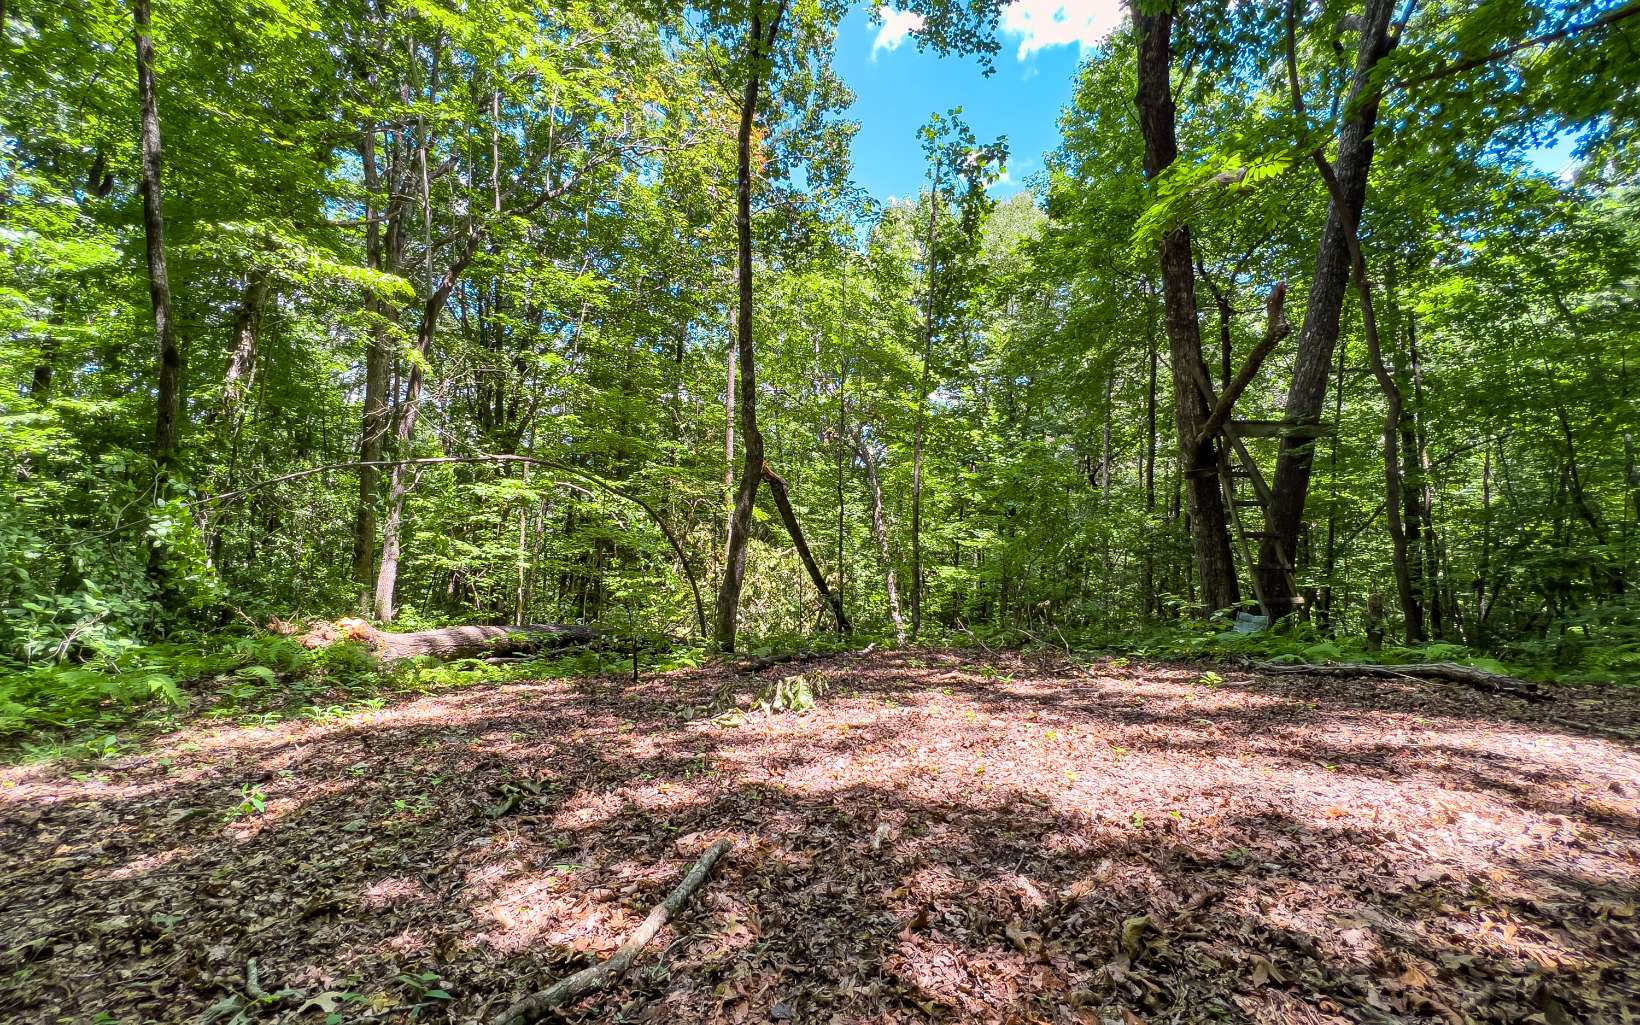 Comprised of two lots (21 and 22A), these combined 11.06 acres are UNRESTRICTED! The Easement Road leads straight from N. Piney Spur Road to a fork and each side leads to large clearings that would make great potential build sites, and each lot has plenty of other flat and gentle areas that could also be suitable for building - all surrounded by picturesque trees and ferns! These lots are about 20 min. from both Ellijay and from Amicalola Falls State Park (one of the top attractions in Georgia!) and the famous Burt's Pumpkin Farm, and just up the road a few miles is the Cartecay River and B.J. Reece Orchards.